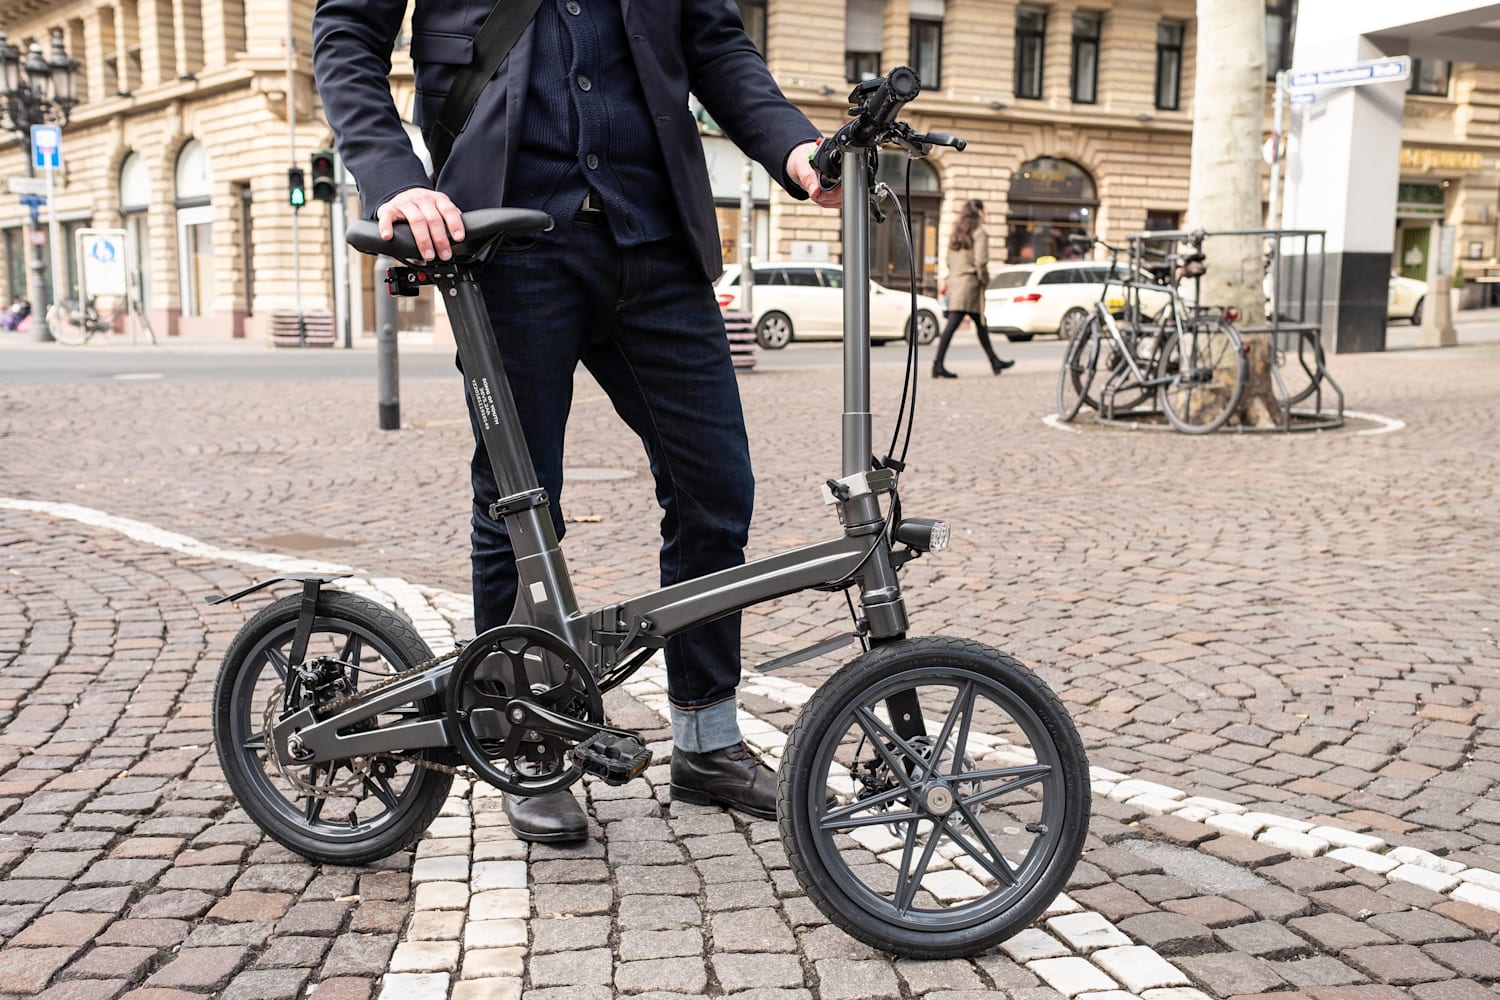 lightest electric bicycle